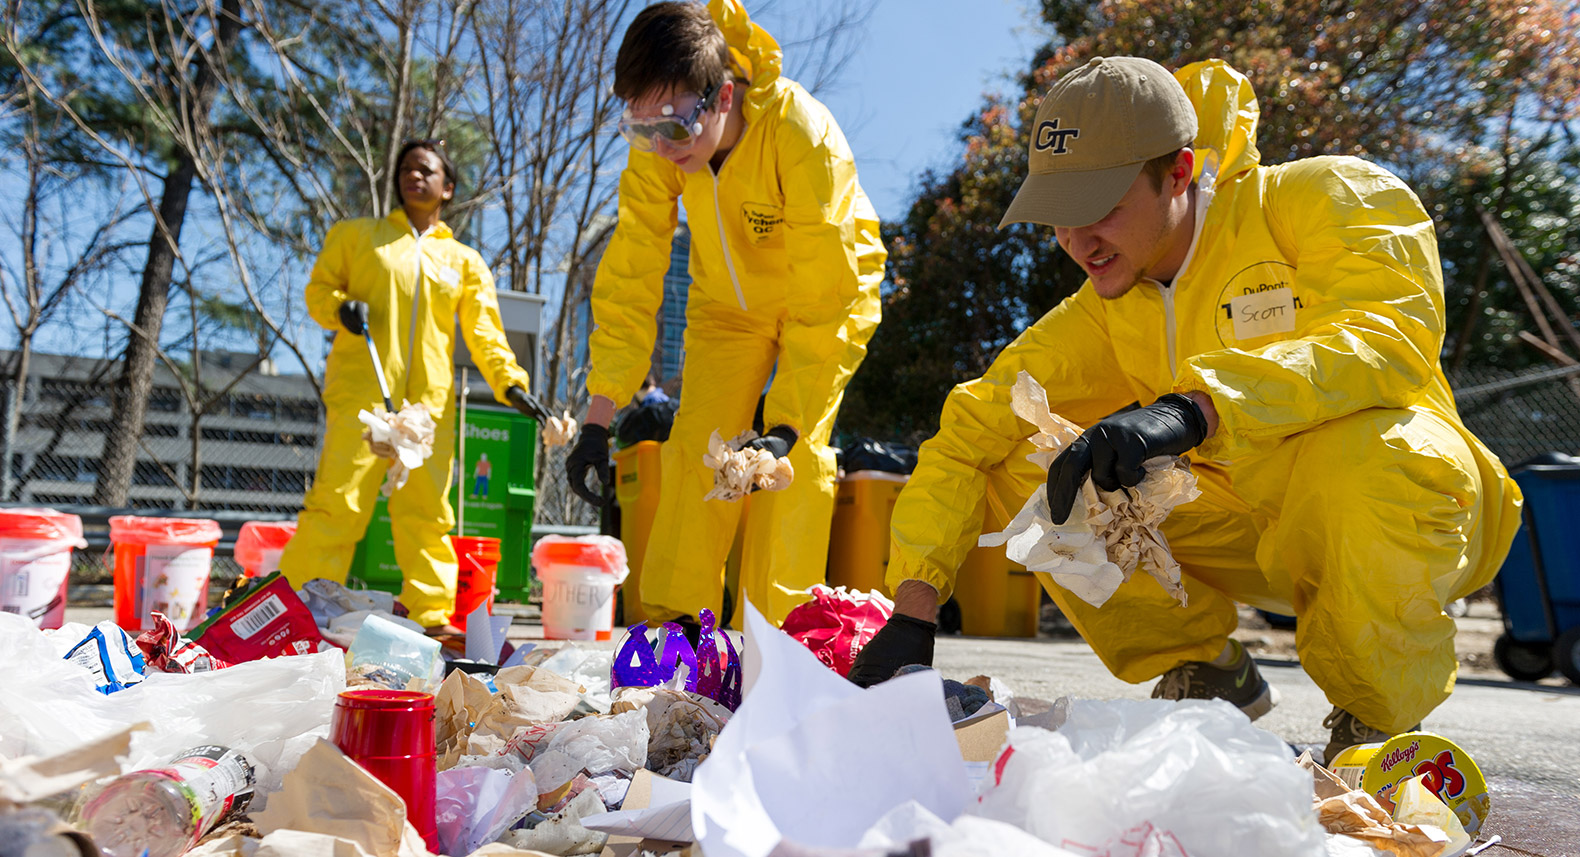 Students in yellow plastic jumpsuits dig through a pile of trash on the ground and sort it into orange 5-gallon buckets labeled with categories of recycling and waste